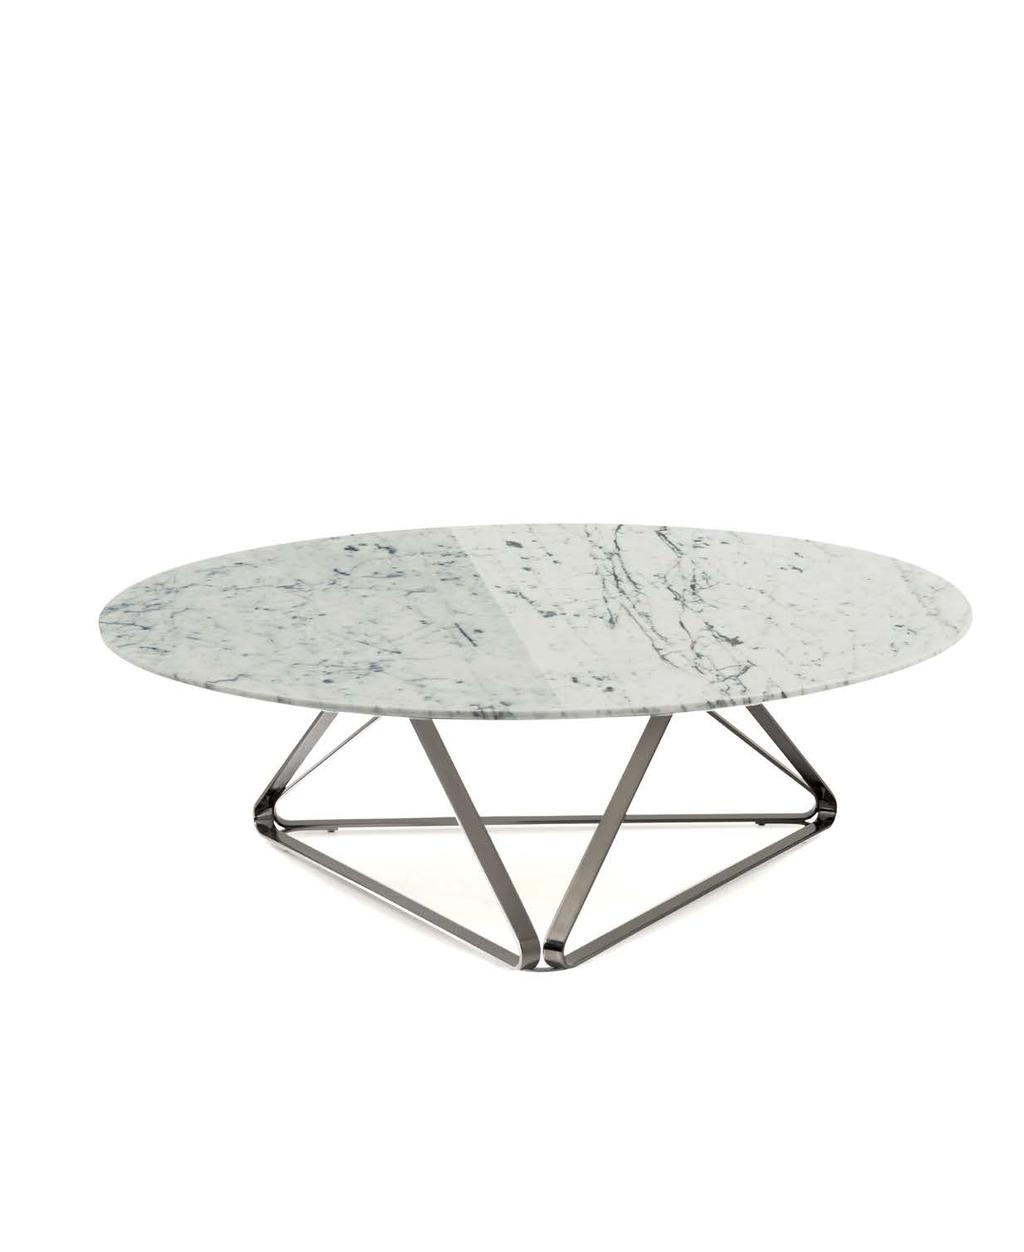 34 TOSCO MARBLE Coffee table, CTT (16M) Stainless steel frame with